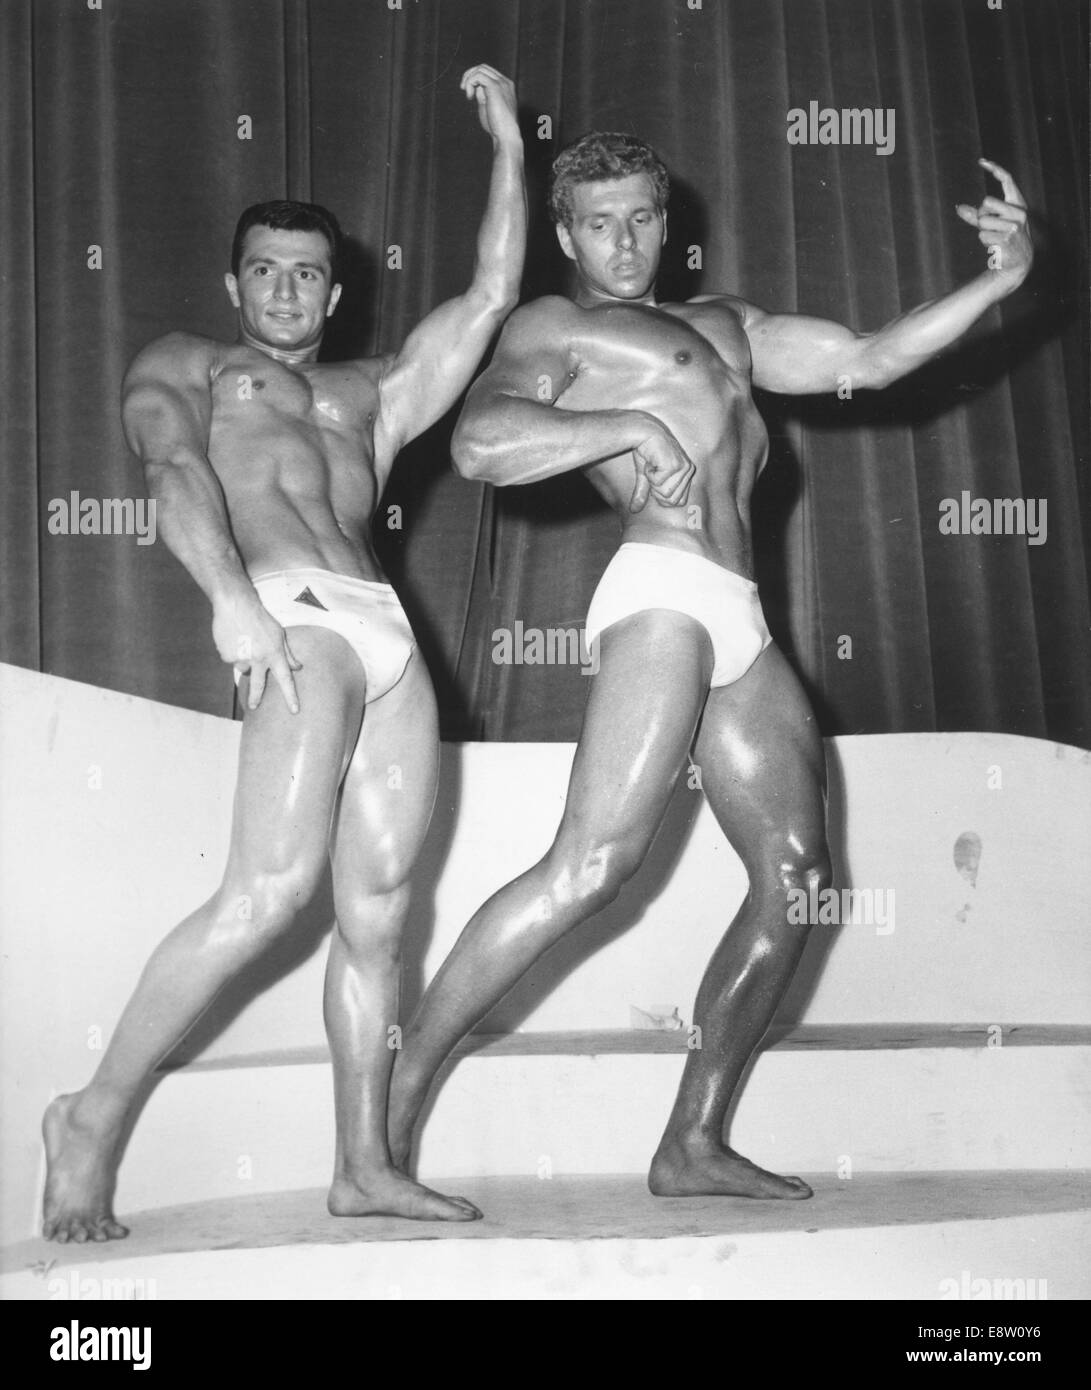 Paris, France. 26th Apr, 1959. Bodybuilding Winners L-R ANDRE HAVIO, in Short category, and CHRISTIAN BARRAU, in Tall category, win Mr Paris 1959 (Short) and Mr Paris 1959 (Tall), pose for their judges at the Maison de la Chimie, Paris. © KEYSTONE Pictures/ZUMA Wire/ZUMAPRESS.com/Alamy Live News Stock Photo